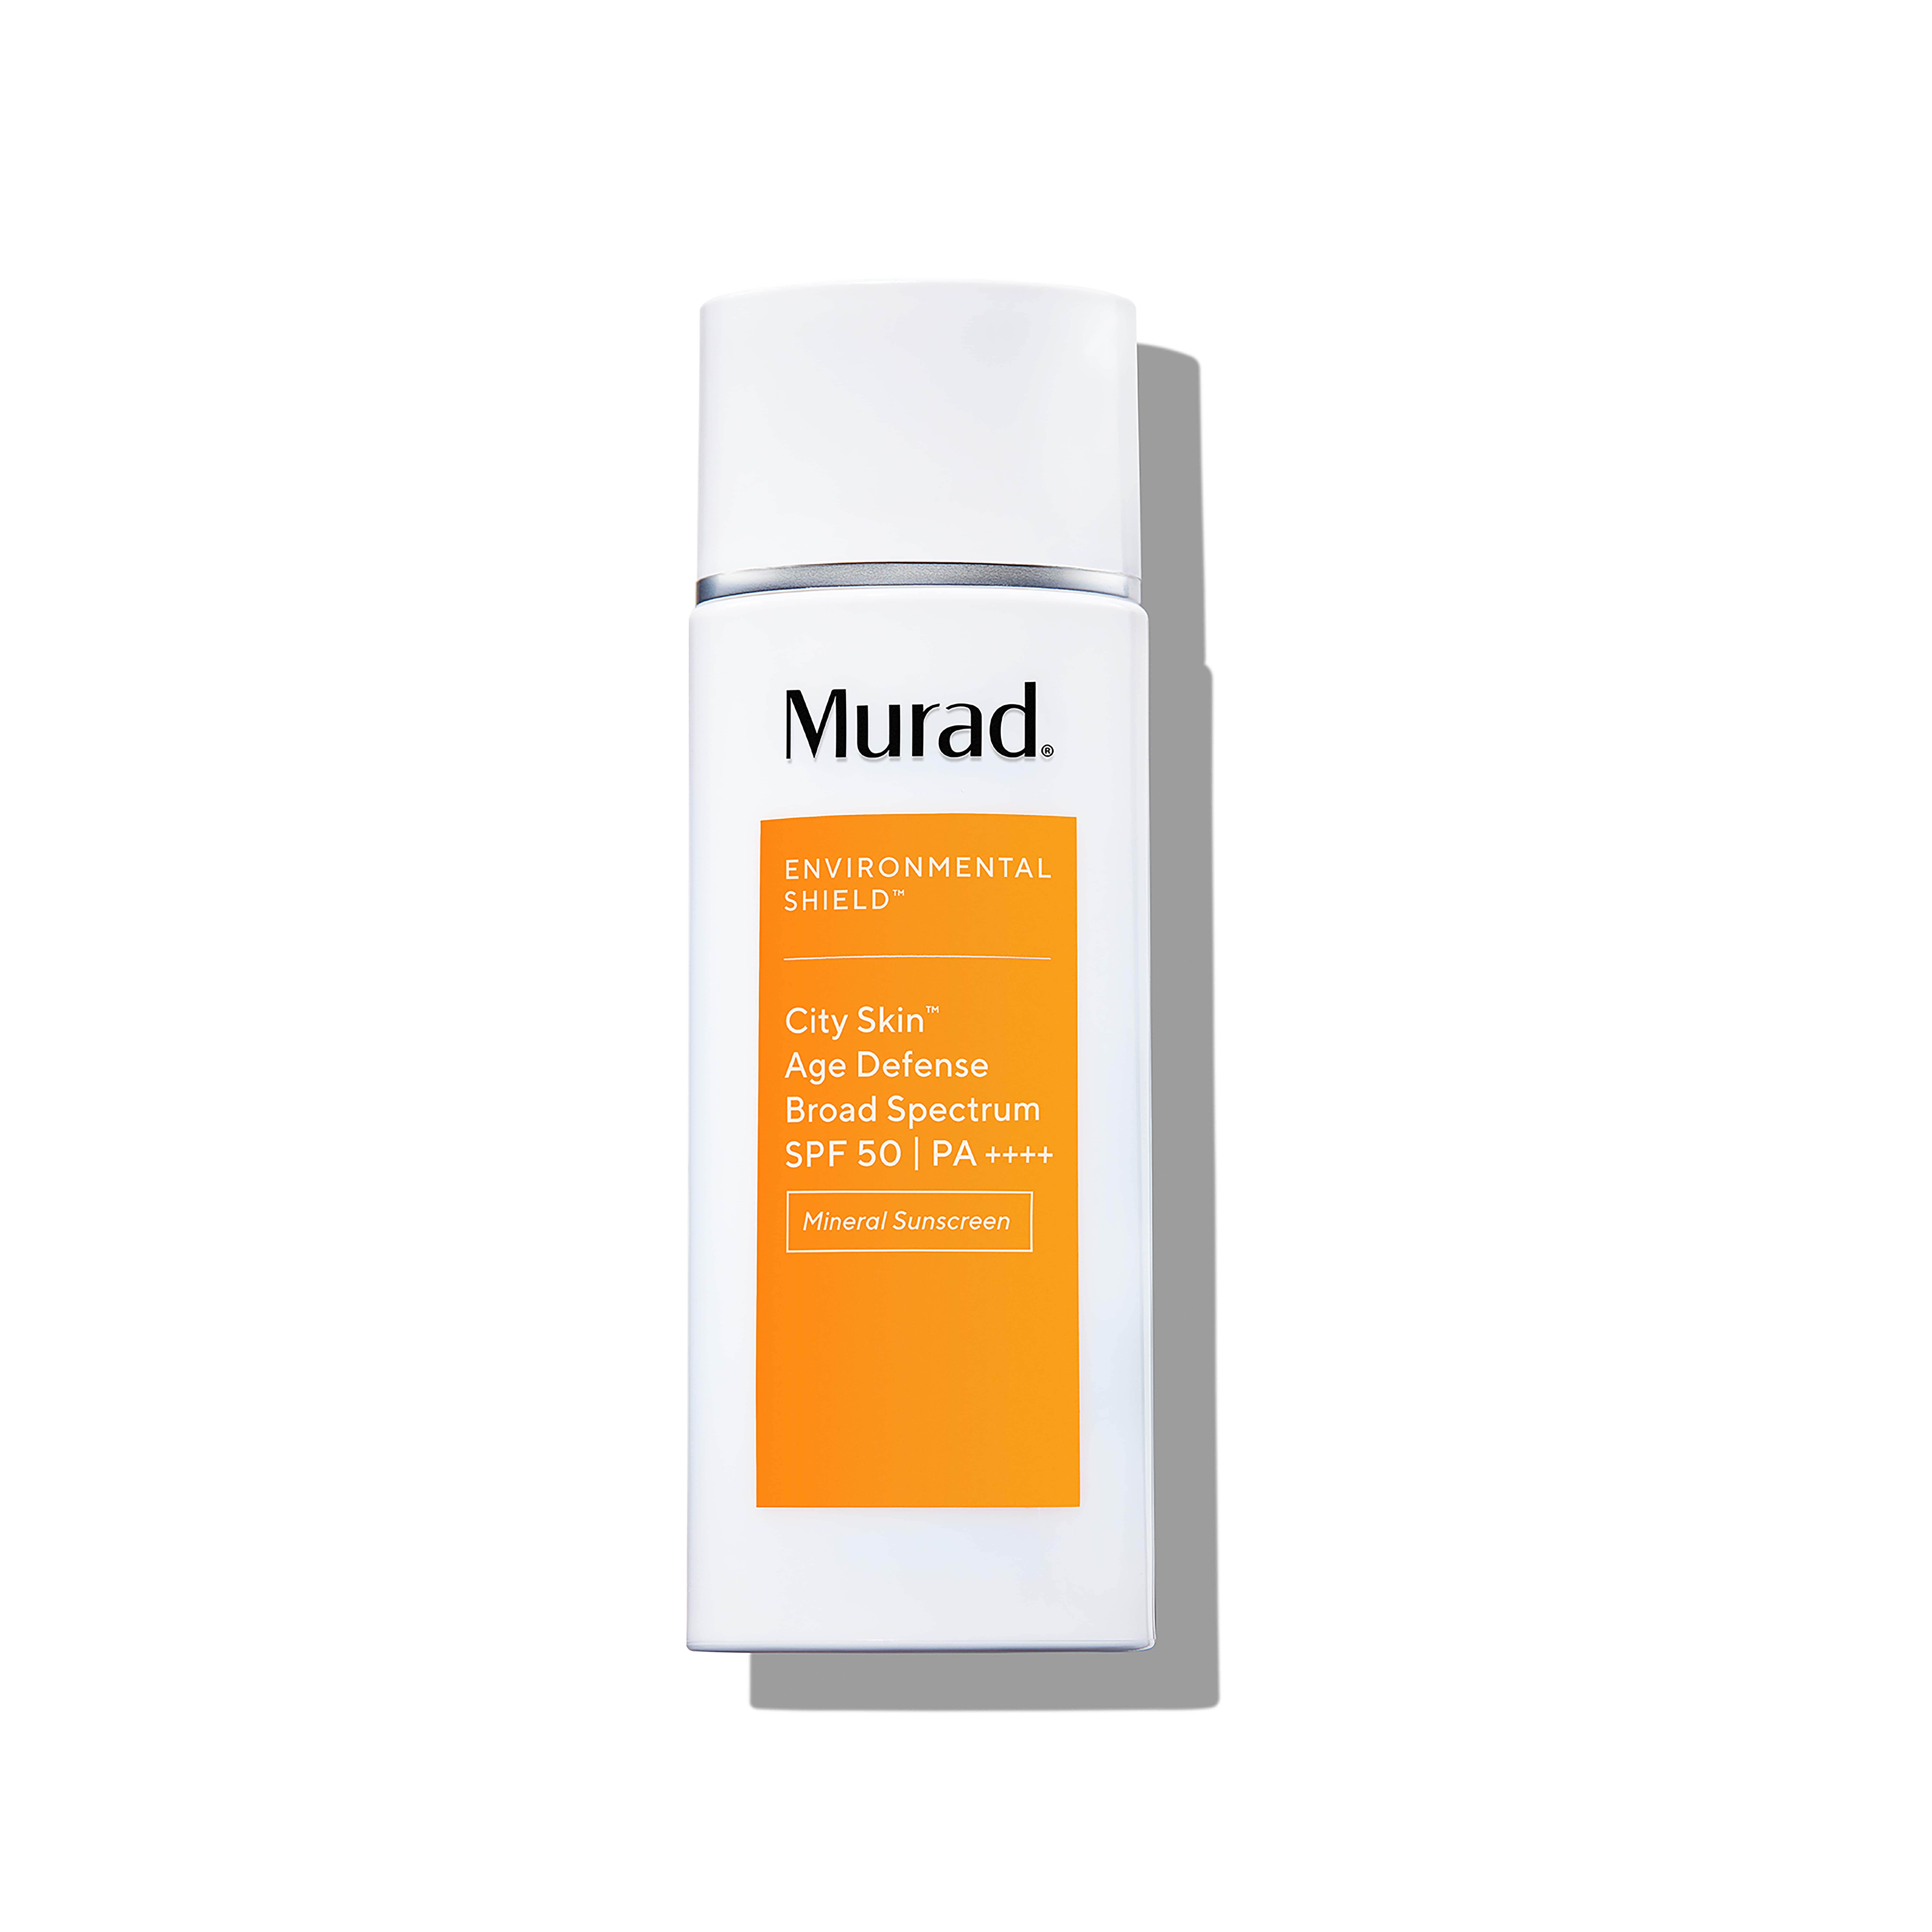 Murad City Skin Age Defense Broad Spectrum SPF 50 I PA +++ - Because HOW can you leave the house without sunscreen?